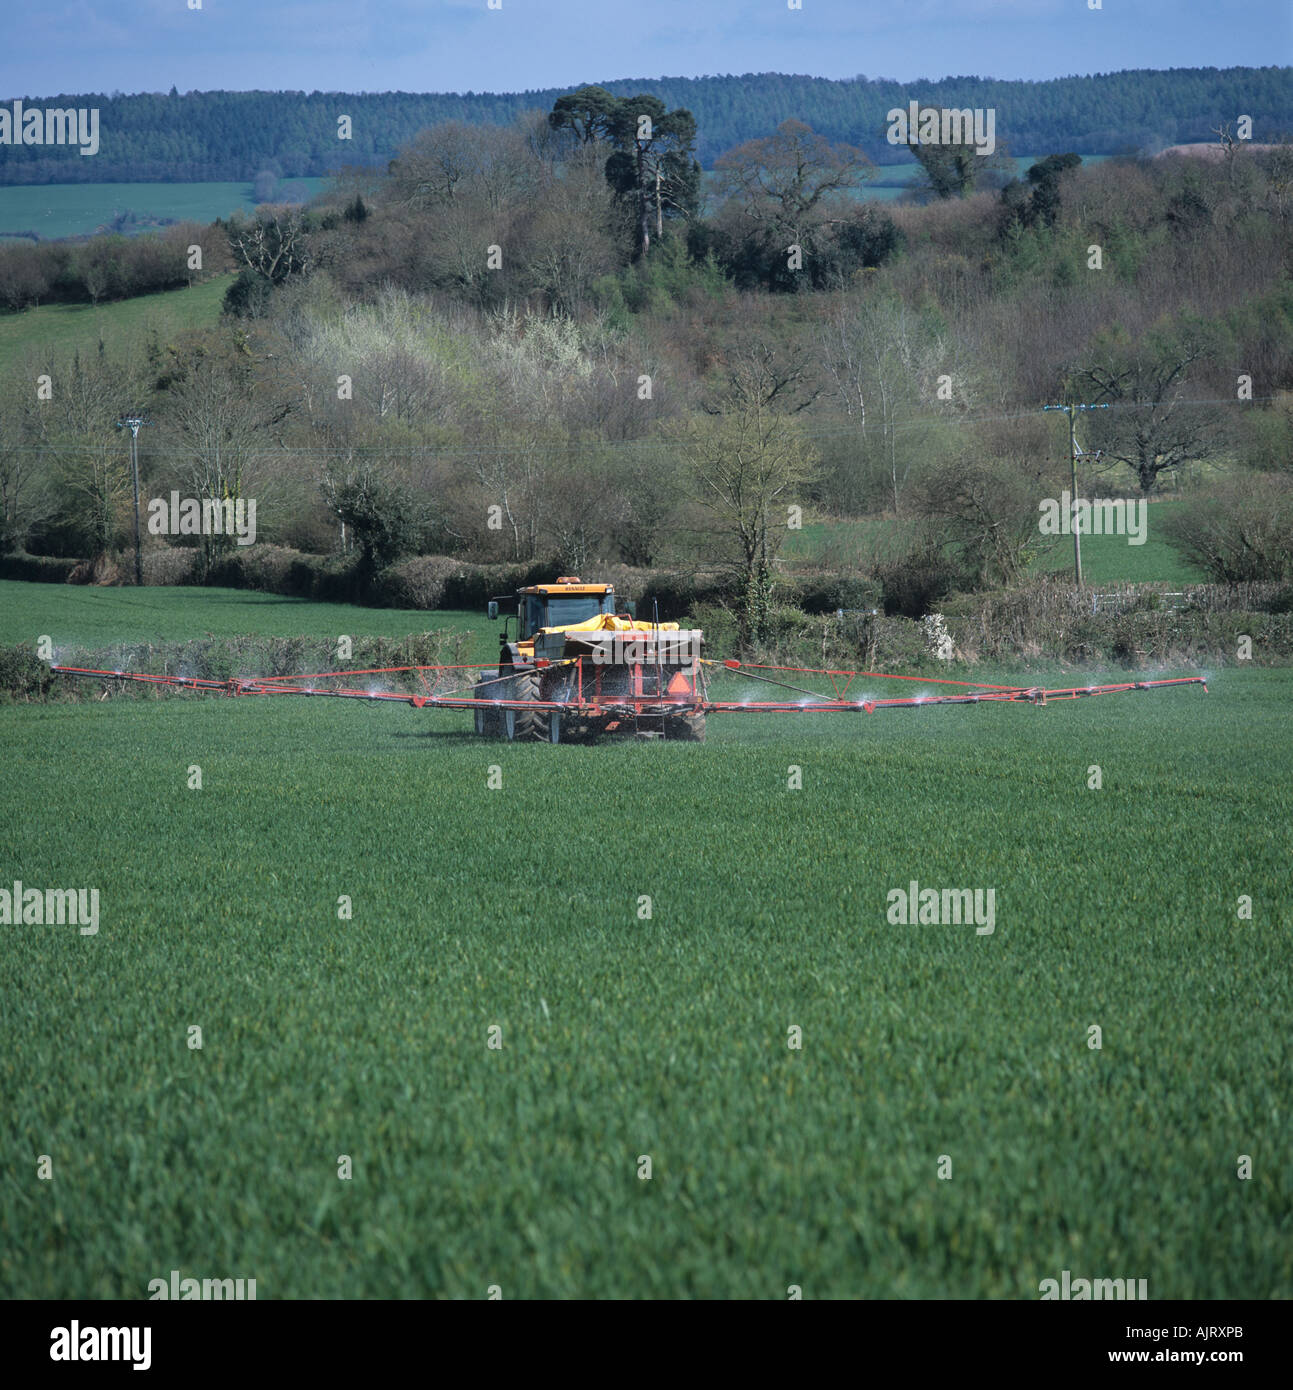 Renault tractor with large granule spreader boom applying fertilizer to wheat Stock Photo